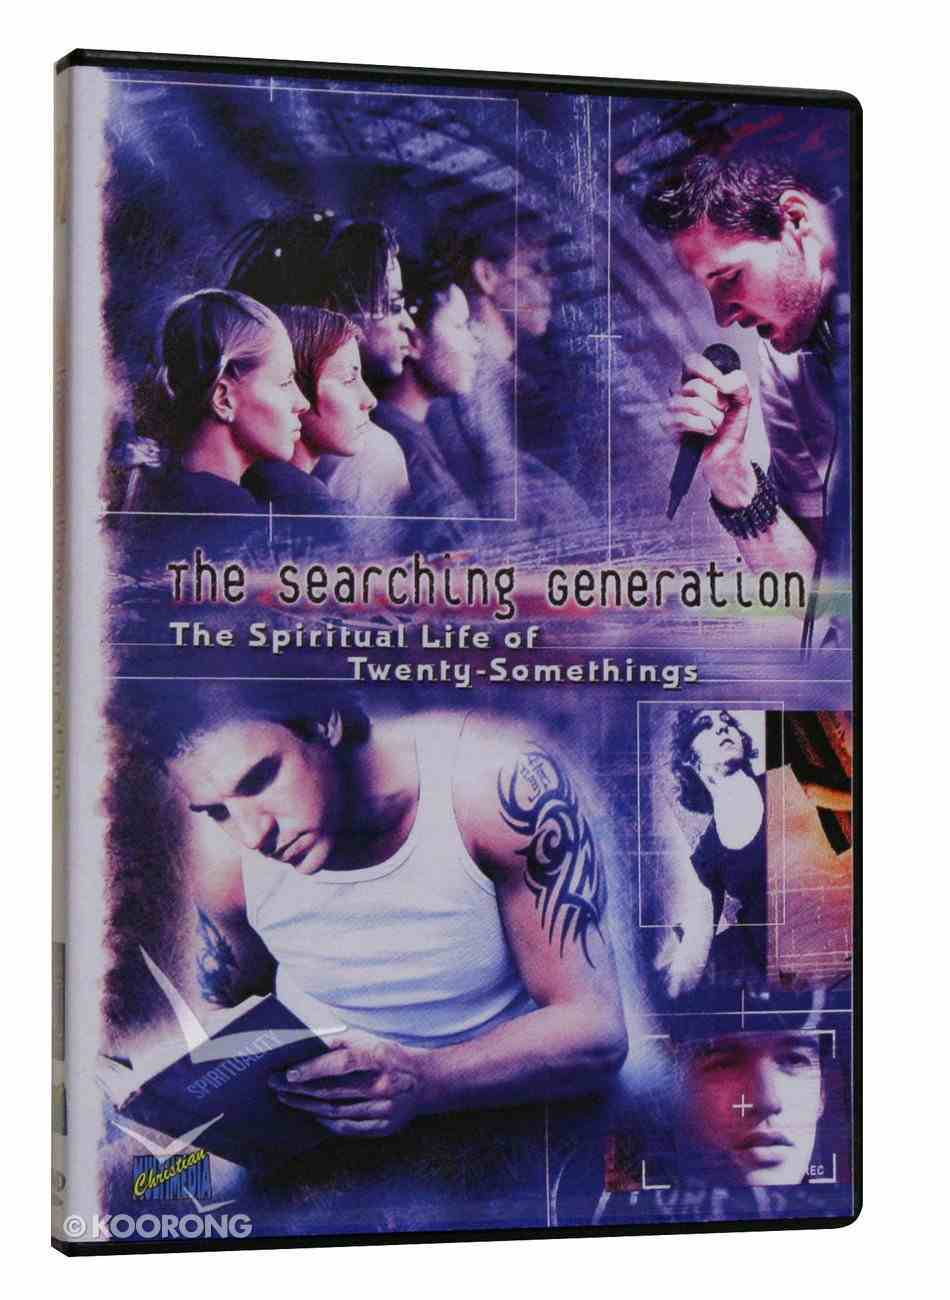 The Searching Generation DVD